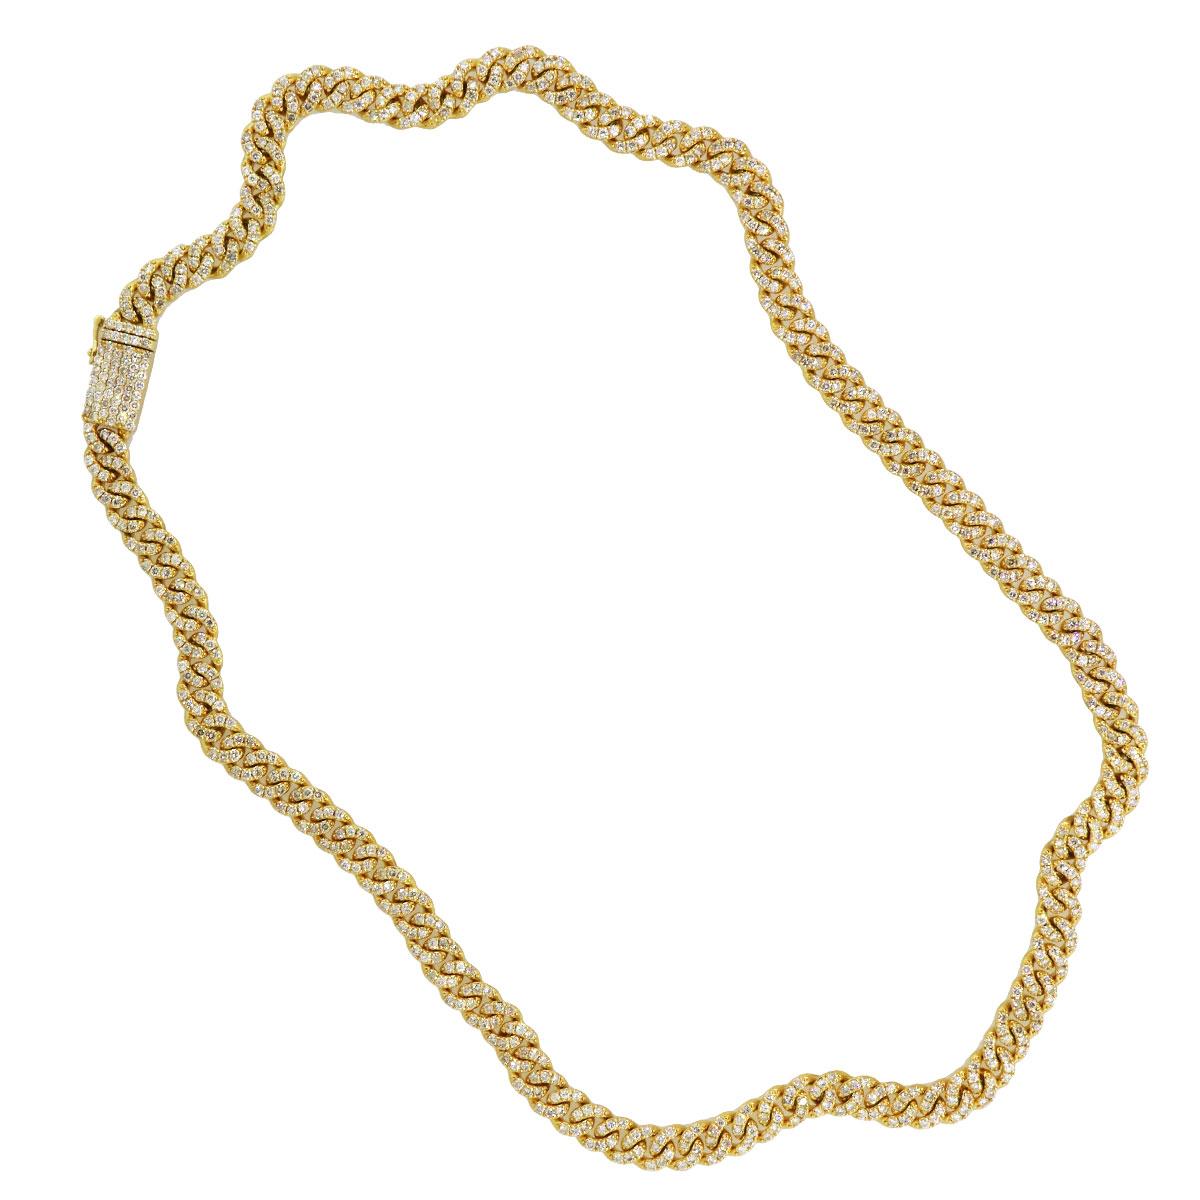 Material 	10k yellow gold
Diamond Details: Approx. 14.80ctw of round cut diamonds. Diamonds are G/H in color and VS in clarity
Measurements: Necklace measures 22″ in length.
Fastening: Tongue in box clasp with safety latch
Item Weight: 75.7g